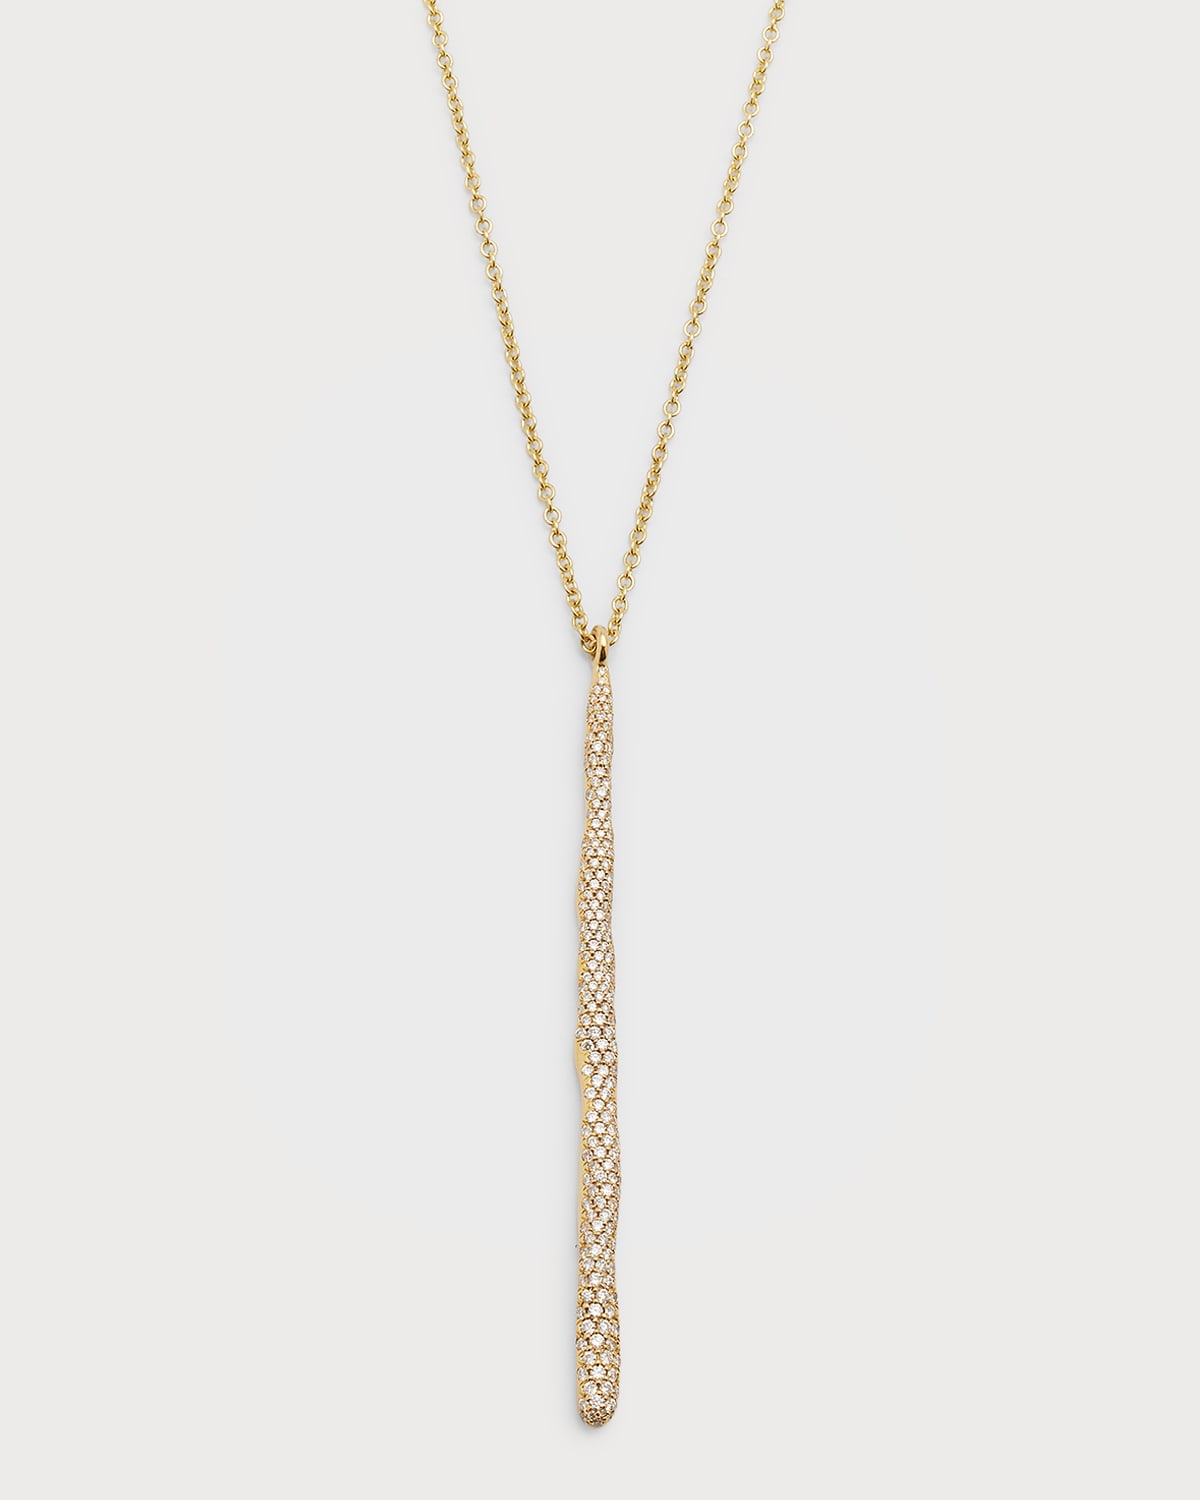 IPPOLITA YELLOW GOLD STARDUST LONG PAVE SQUIGGLE STICK PENDANT NECKLACE WITH DIAMONDS, 16-18"L